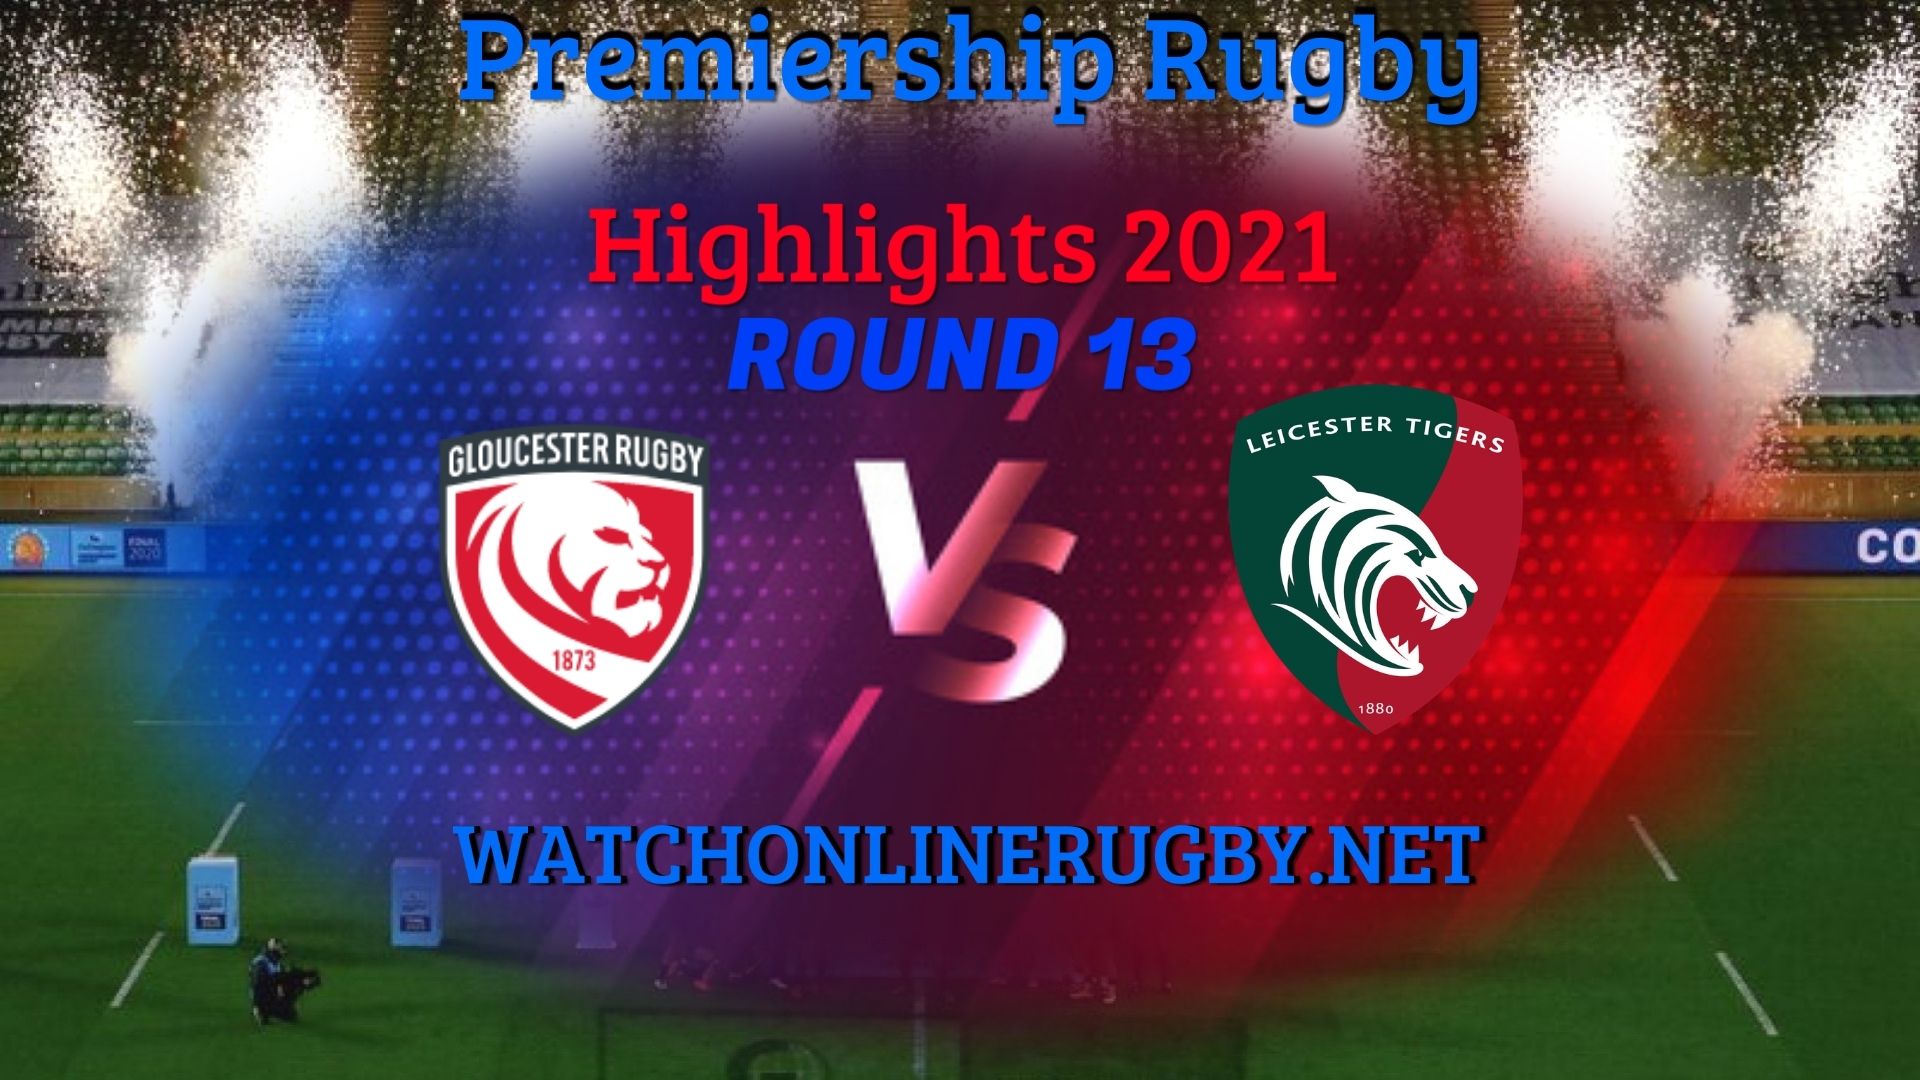 Gloucester Rugby Vs Leicester Tigers Premiership Rugby 2021 RD 13